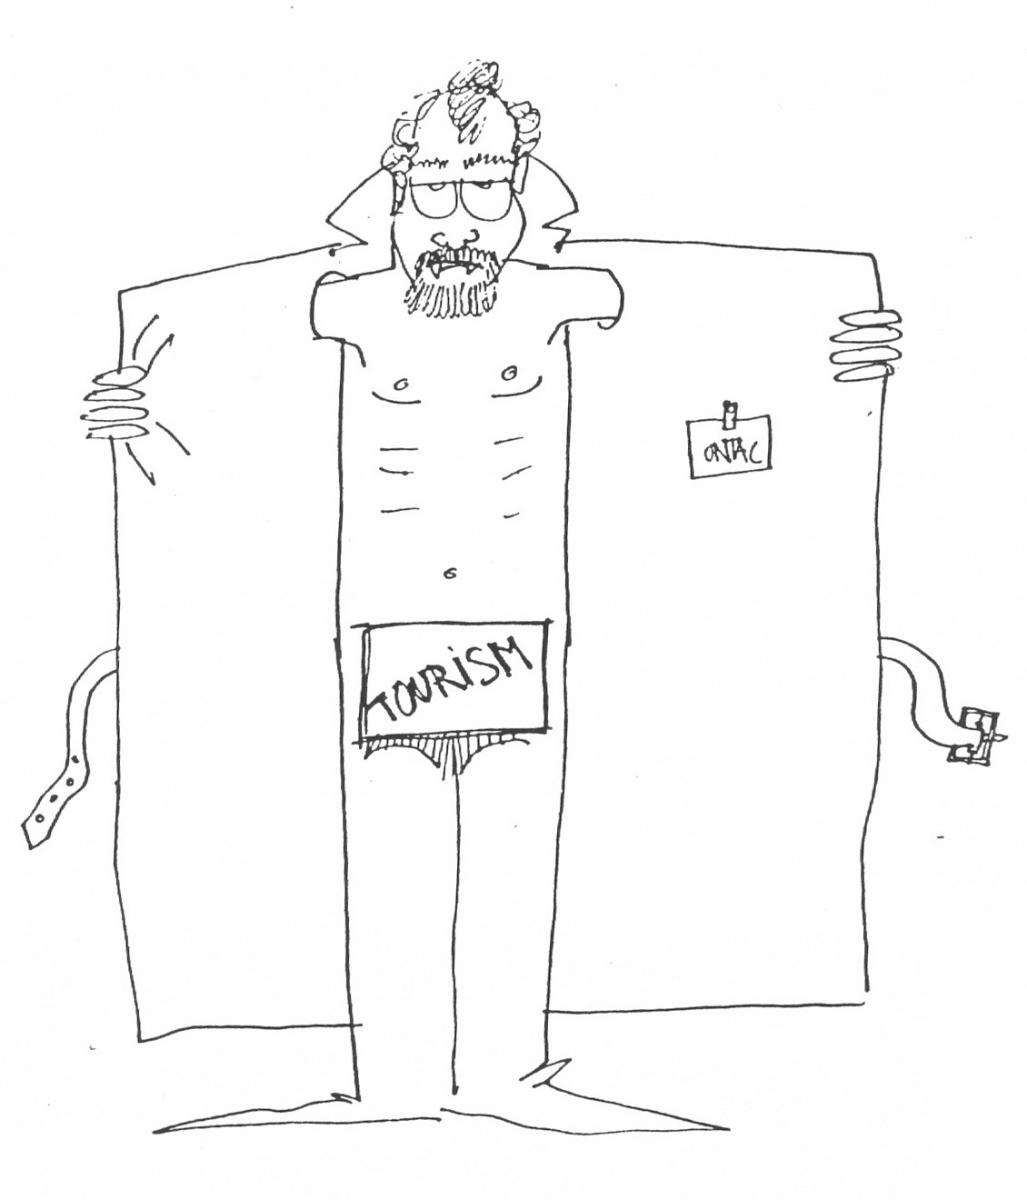 Caricature of Christophe Pottier (conservation architect) from  Peter Aderhold tourism economist